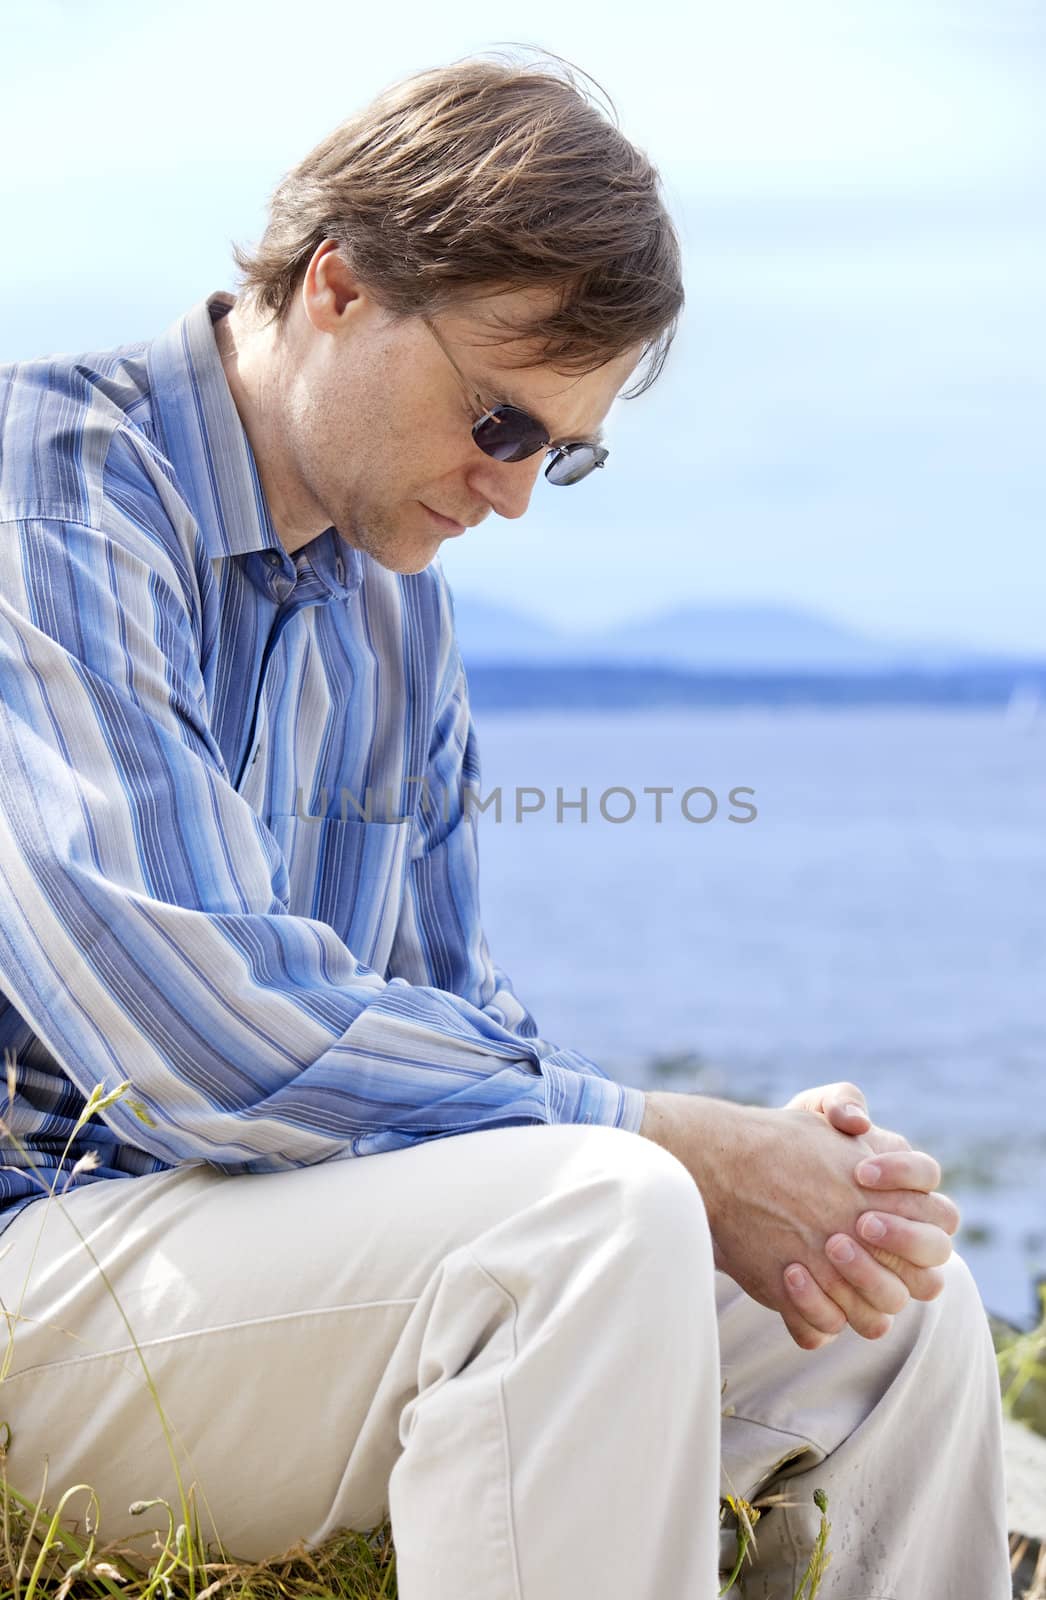 Handsome man in forties praying by side of lake by jarenwicklund